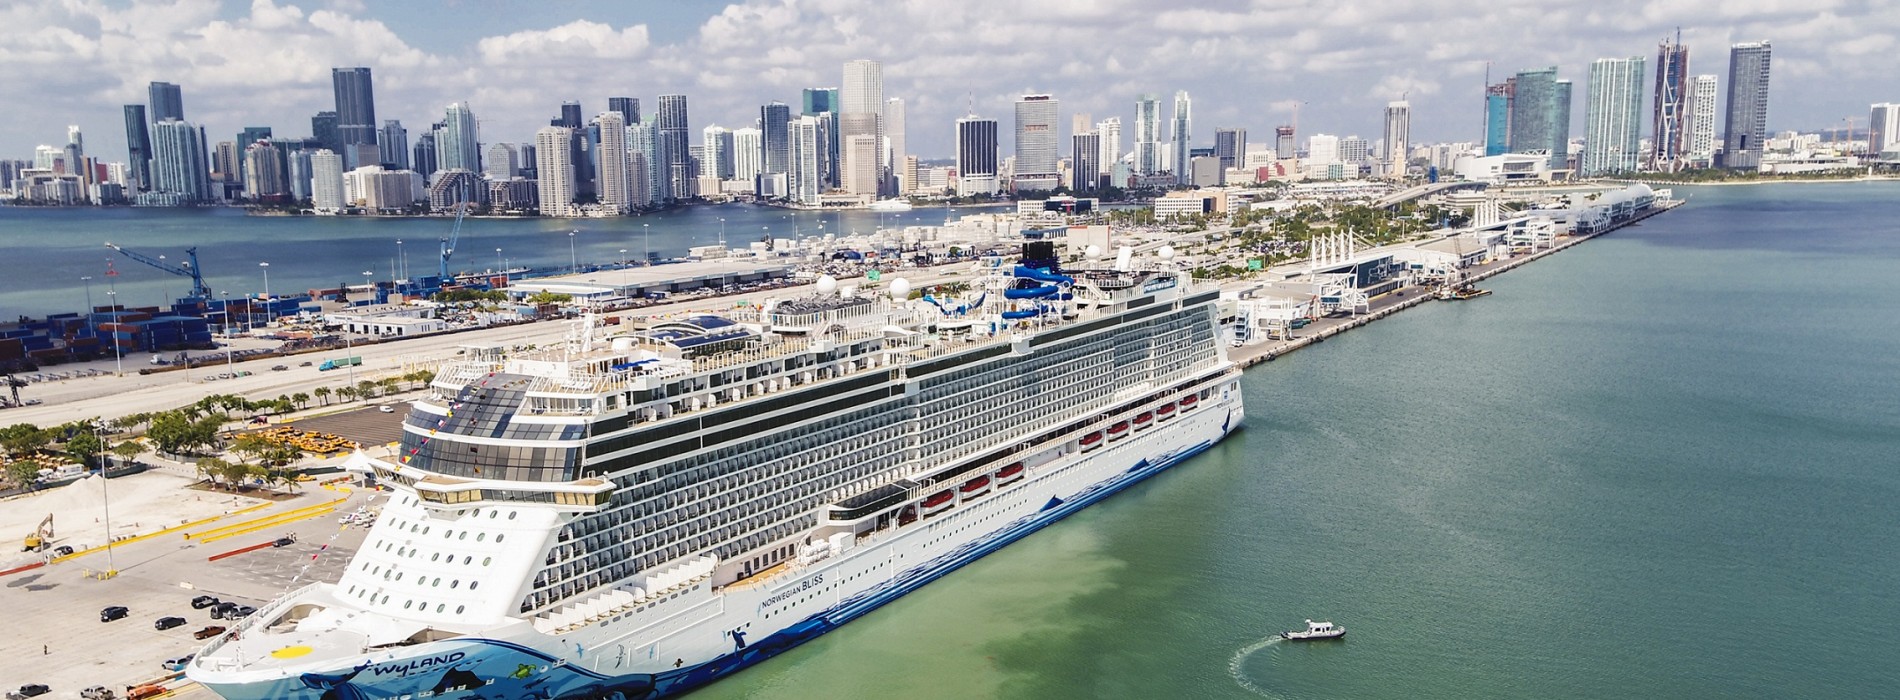 Norwegian Bliss becomes largest Passenger Ship to Traverse Panama Canal